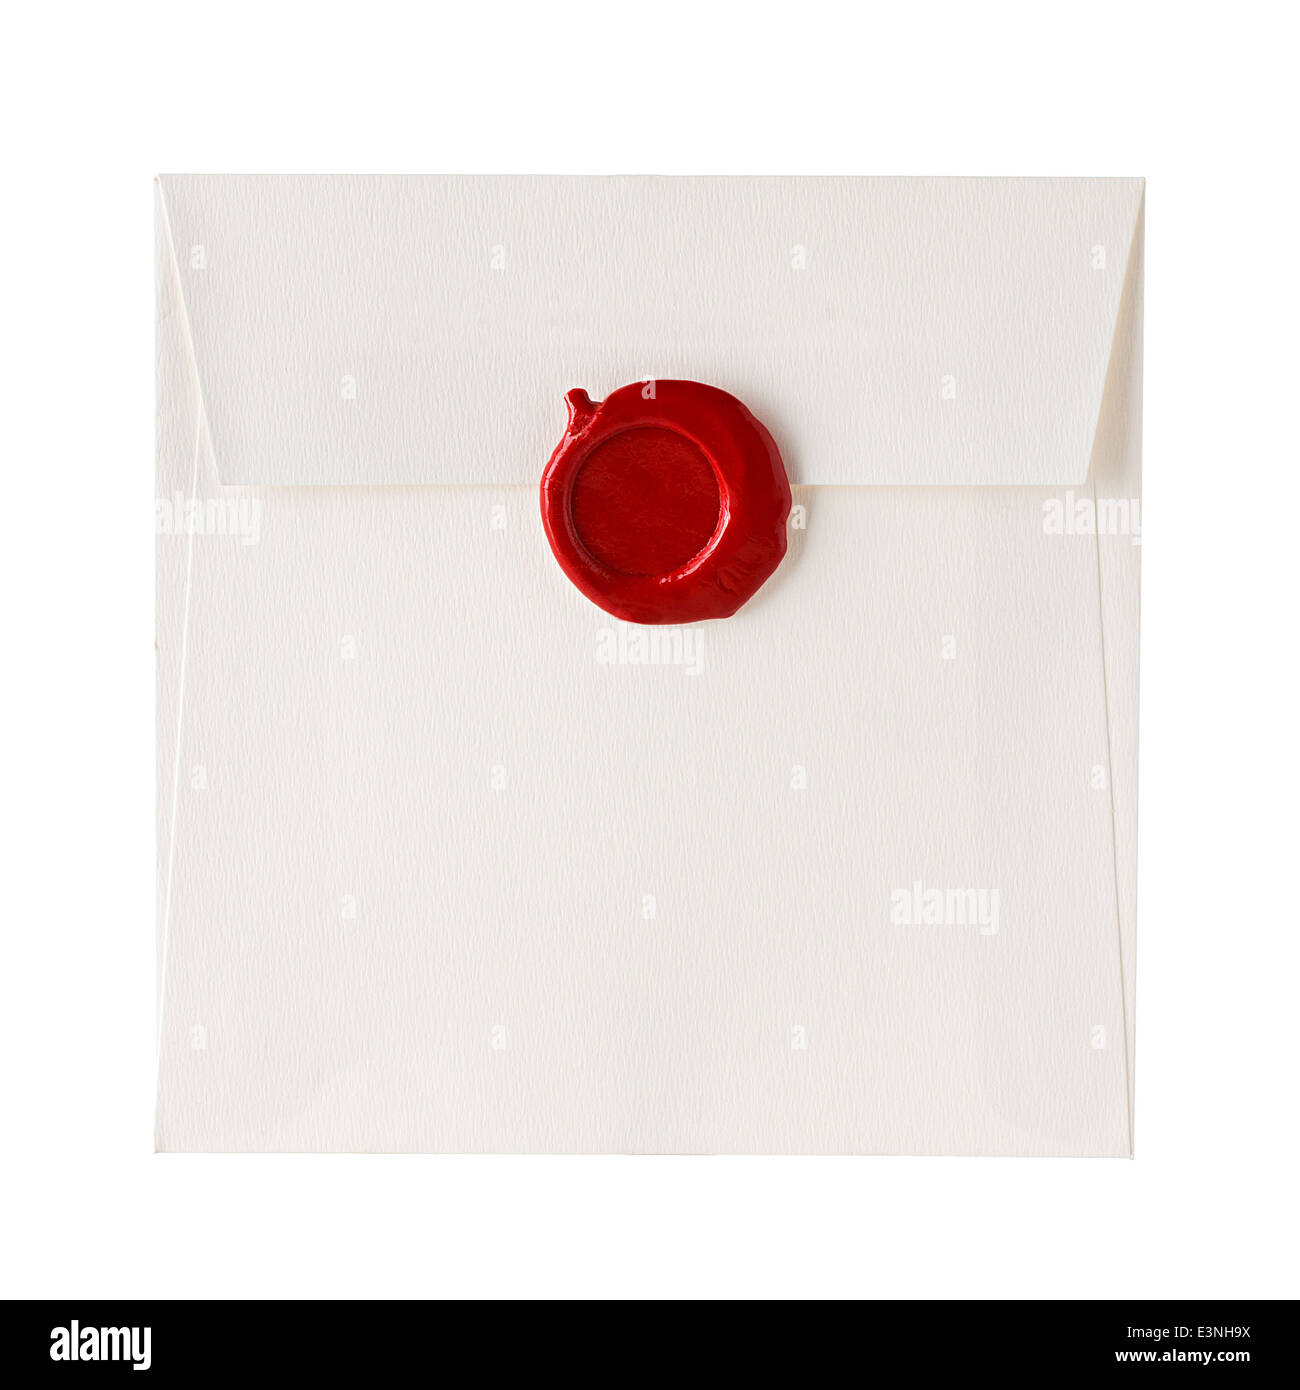 Red Wax Seal Stock Photo